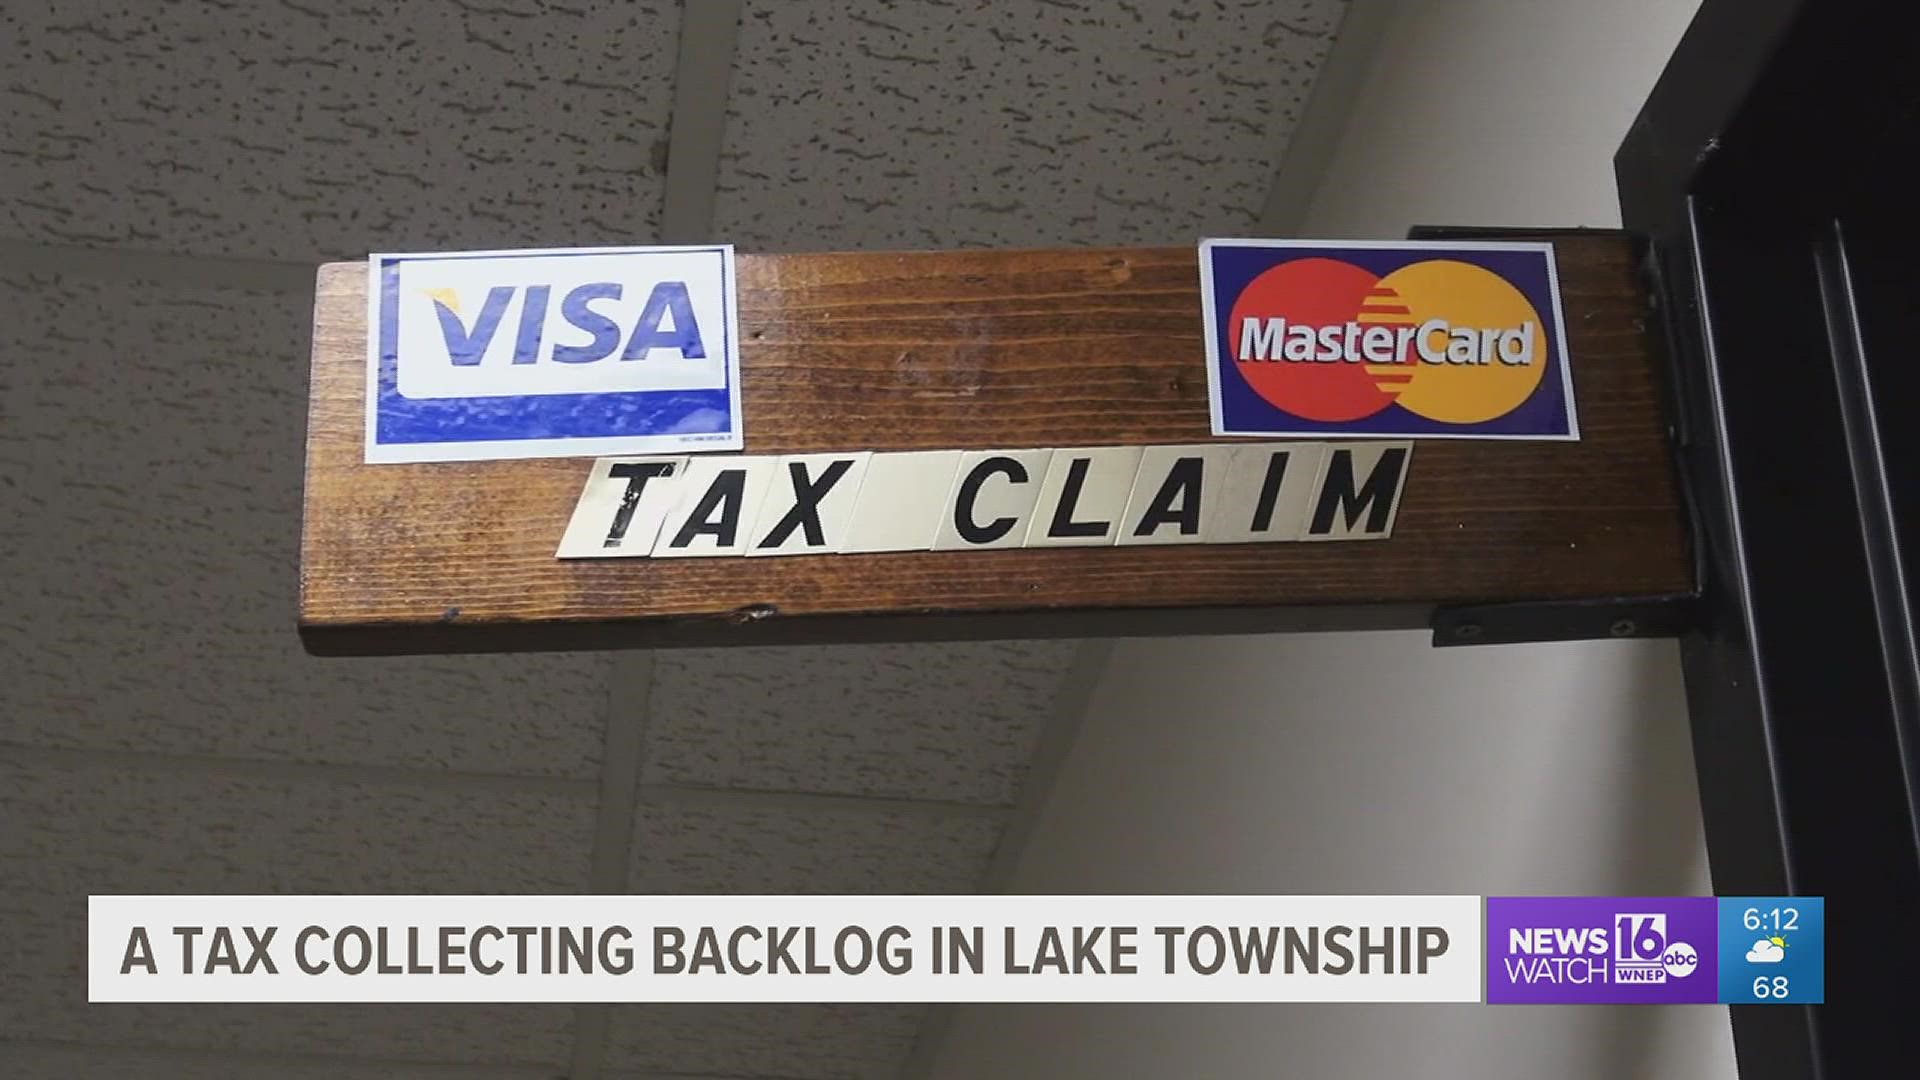 The Wayne County Tax Claim Bureau director says the tax collecting issue has been going on since May.